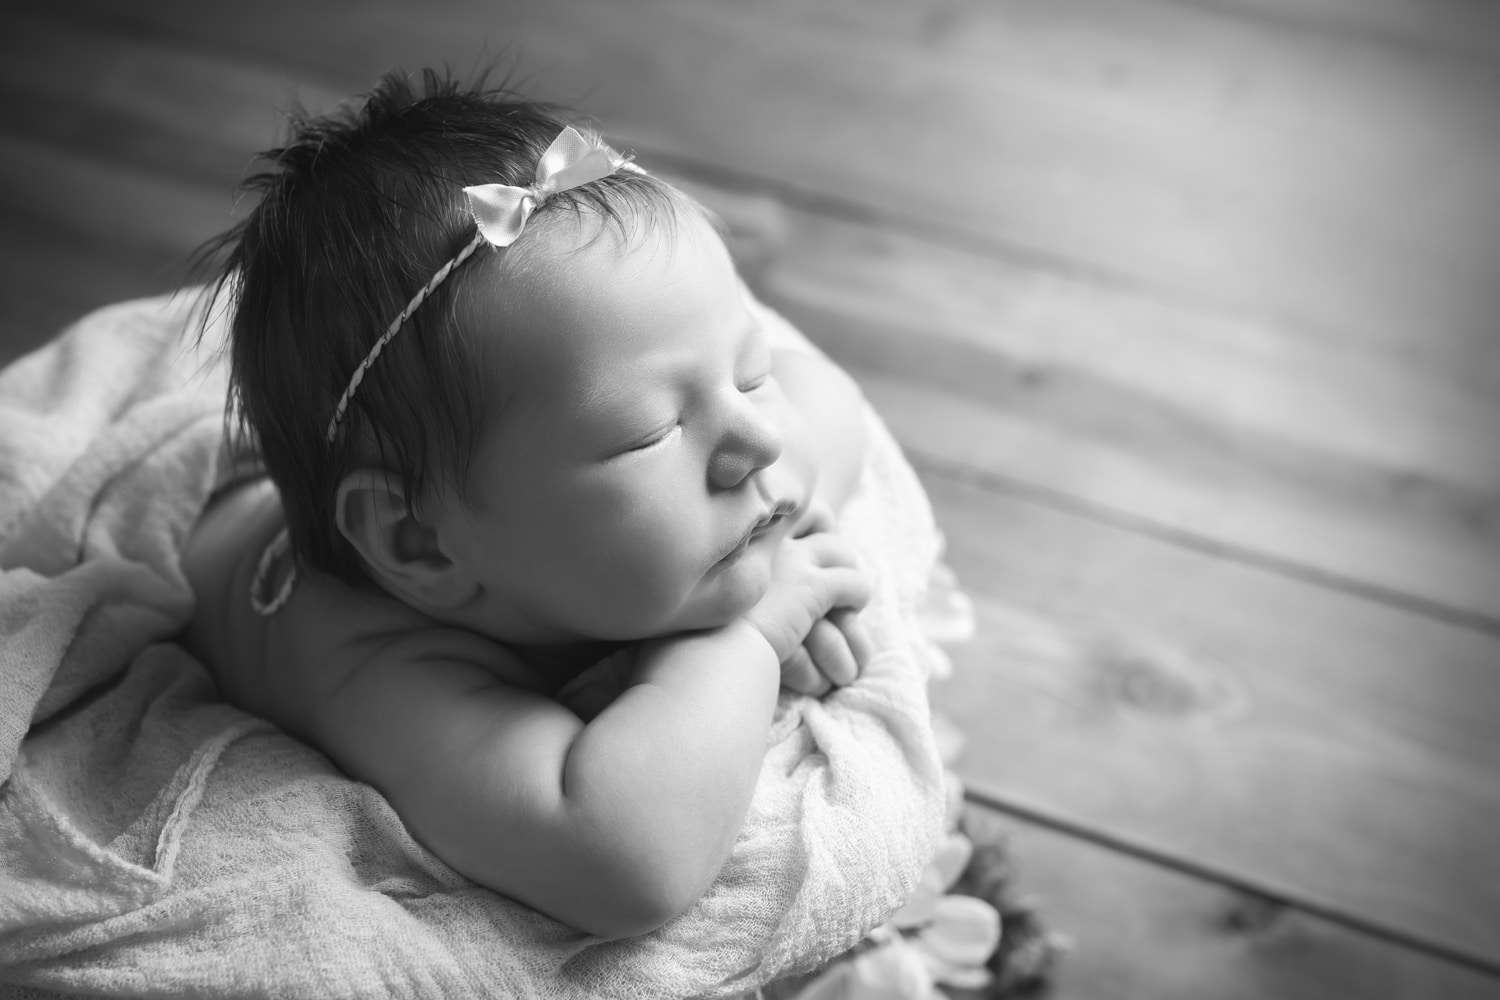 newborn photographer in rochester ny captures newborn baby girl sleeping chin on hands in a bucket